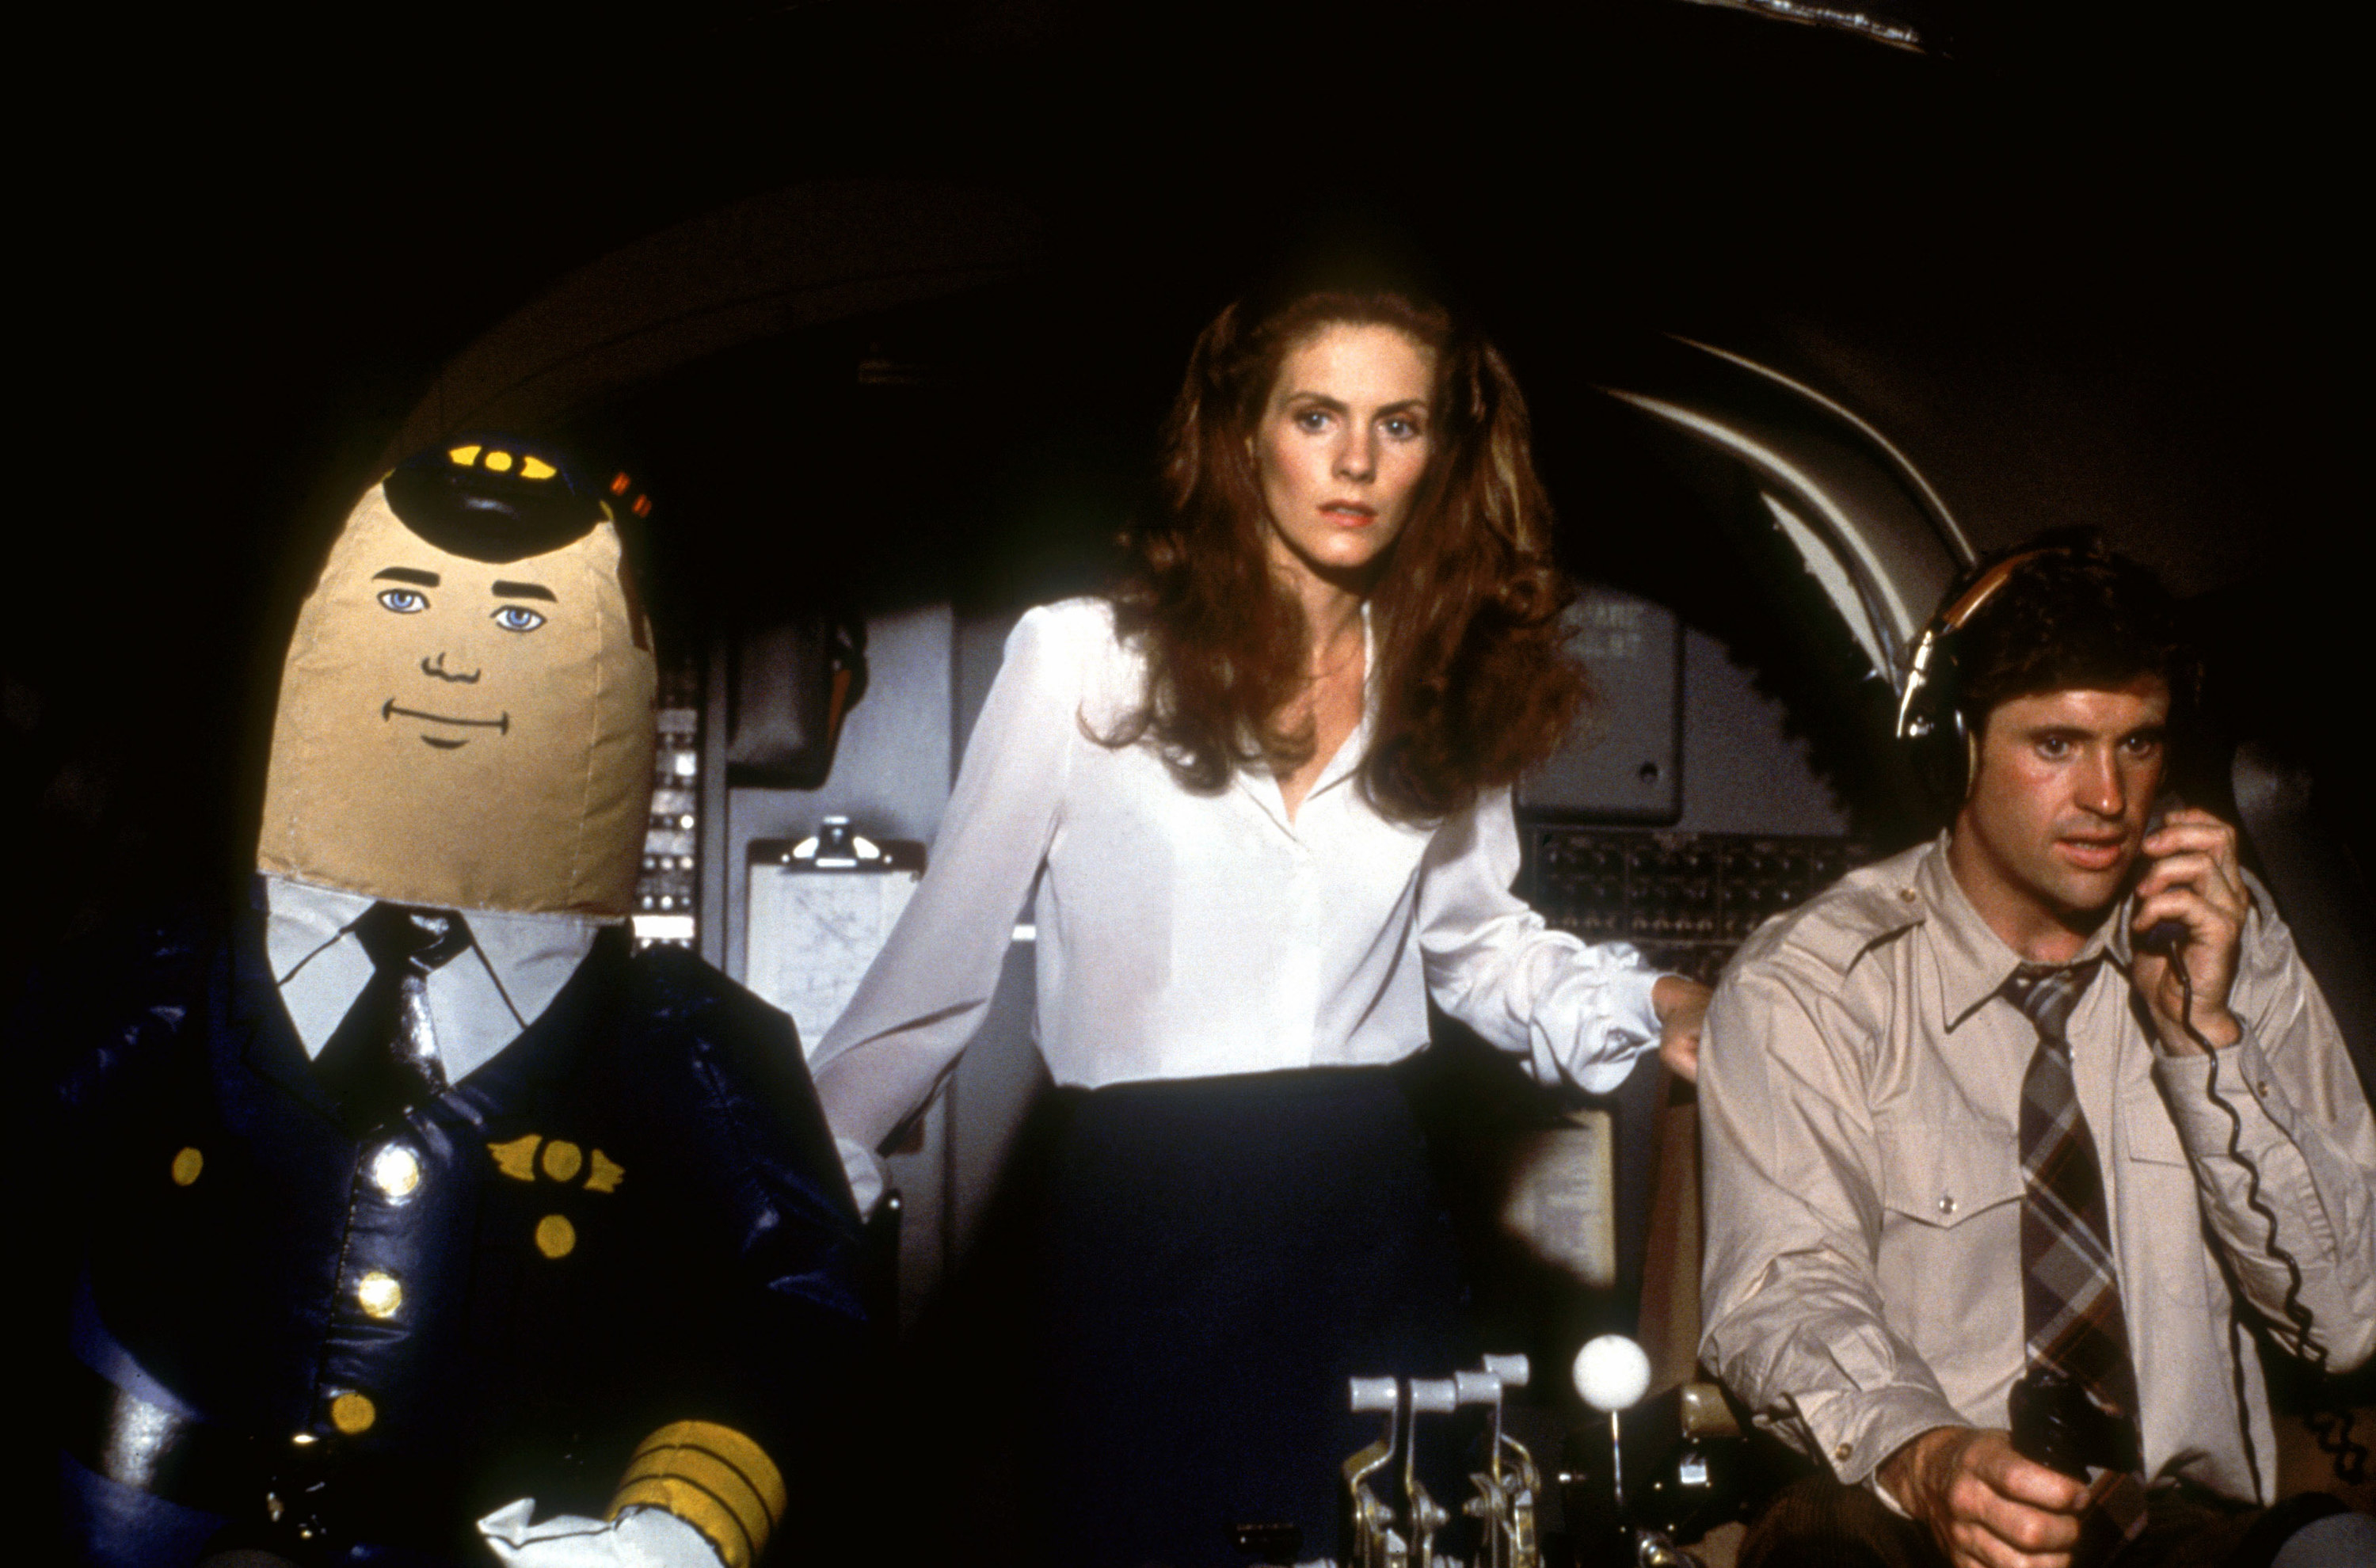 A flight attendant stands between a blow-up doll pilot and a real pilot in the plane cockpit